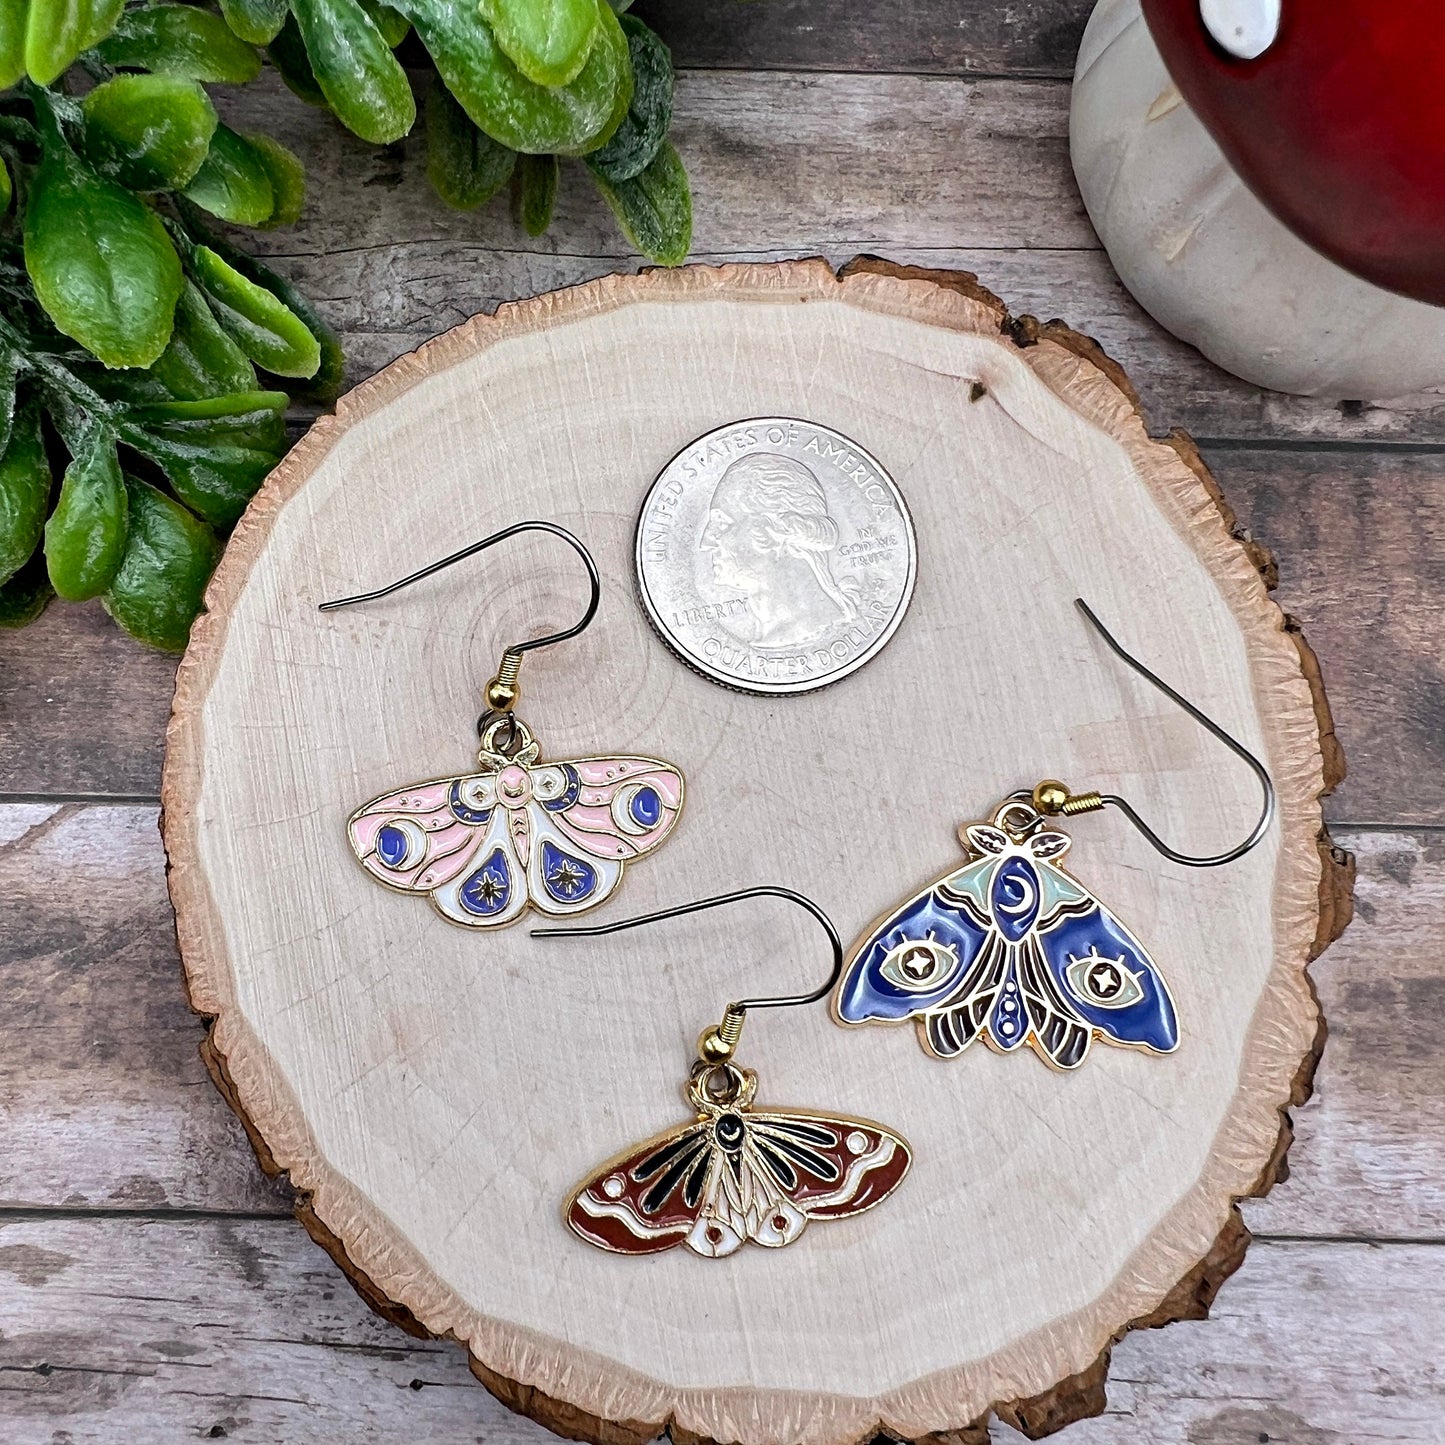 Moth / Butterfly Multicolor Enamel Earrings, Silver and Gold Two-Toned / Goldtone Stainless Steel , Hypoallergenic Gift - Animal